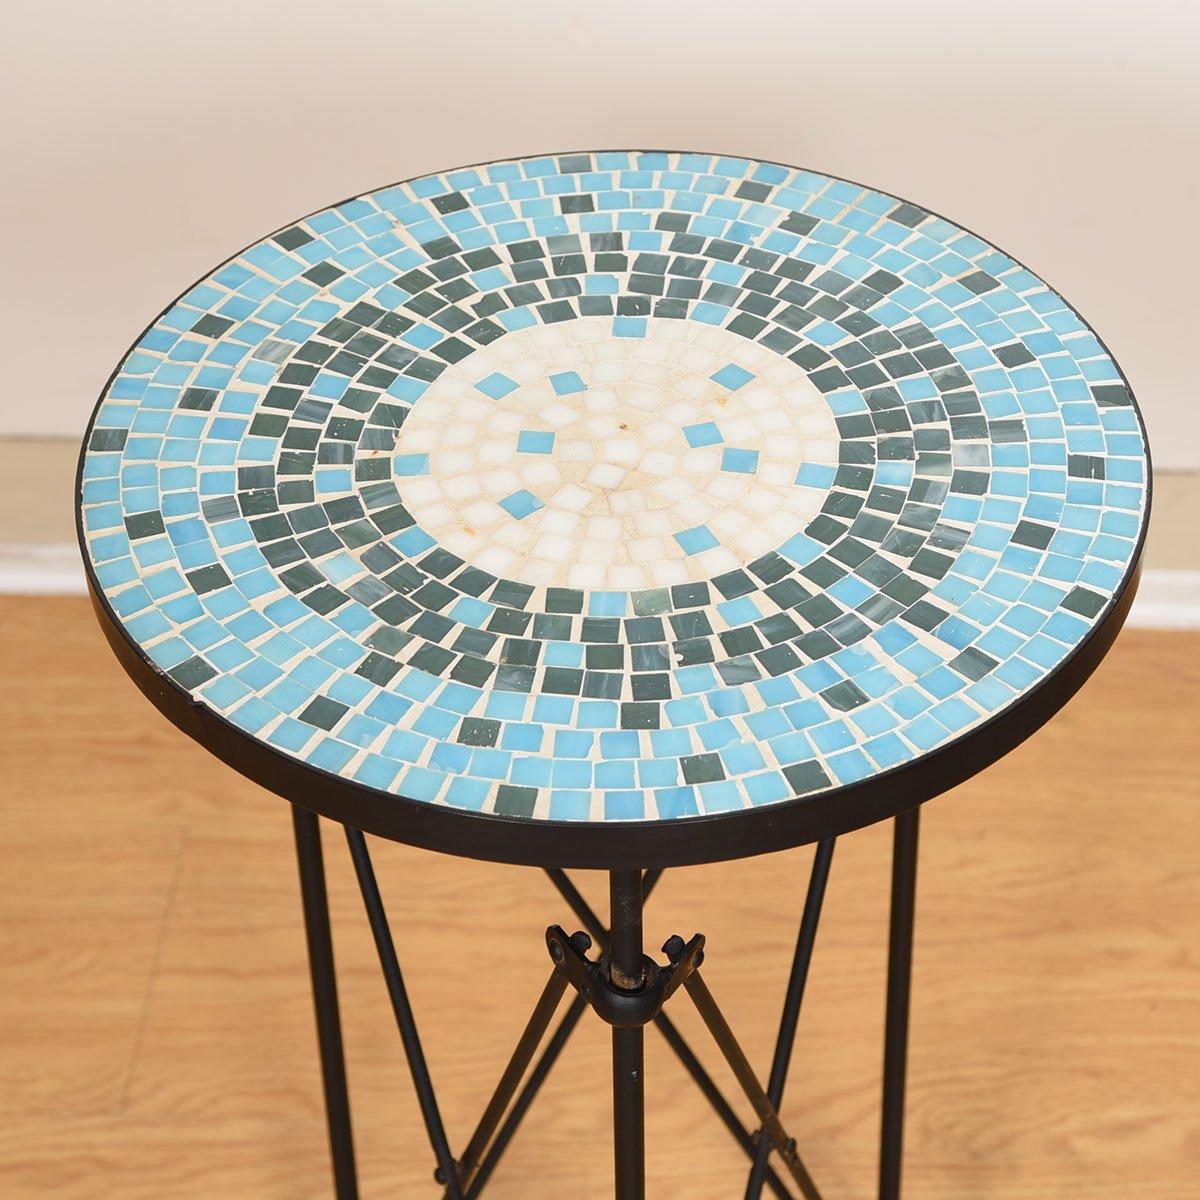 Wrought Iron Midcentury Mosaic Tile Top Accent Table In Excellent Condition For Sale In Kensington, MD